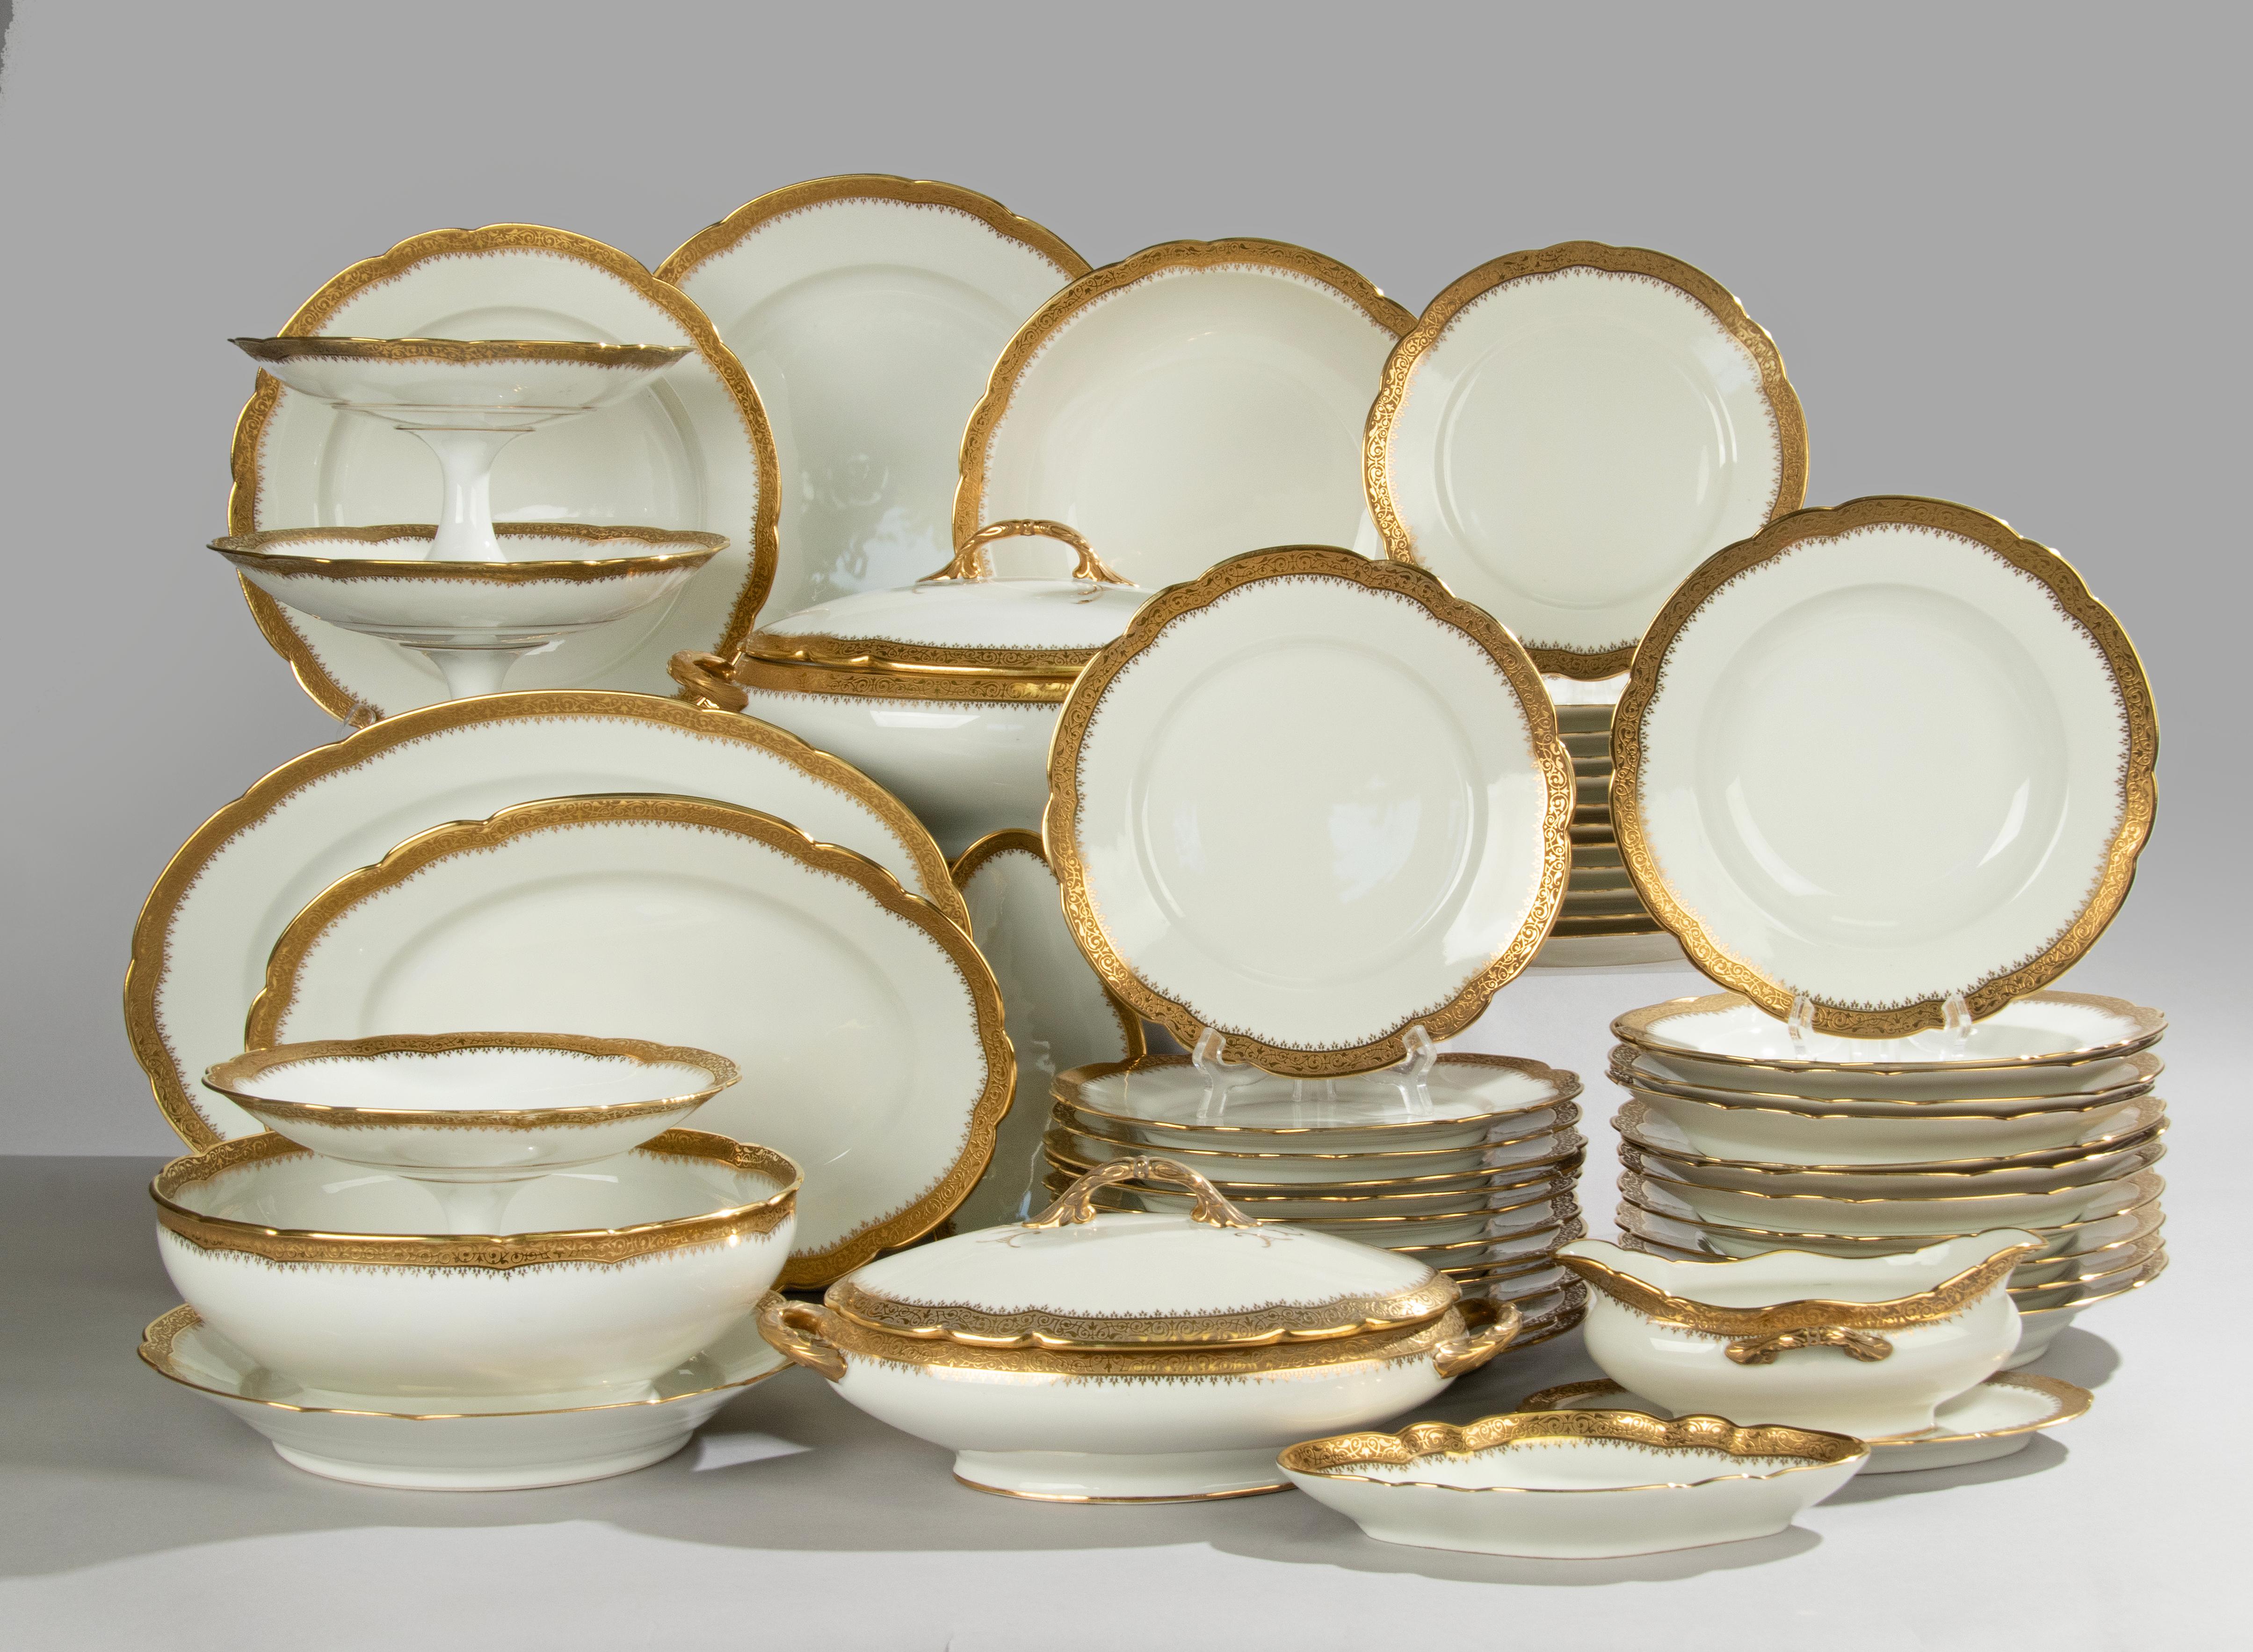 A beautiful porcelain table service for 12 people, presumably from the French brand Limoges. The service contains many serving pieces.
The service is beautifully decorated with inlaid gold edges.
The plates and bowls are all marked with a mark of A.